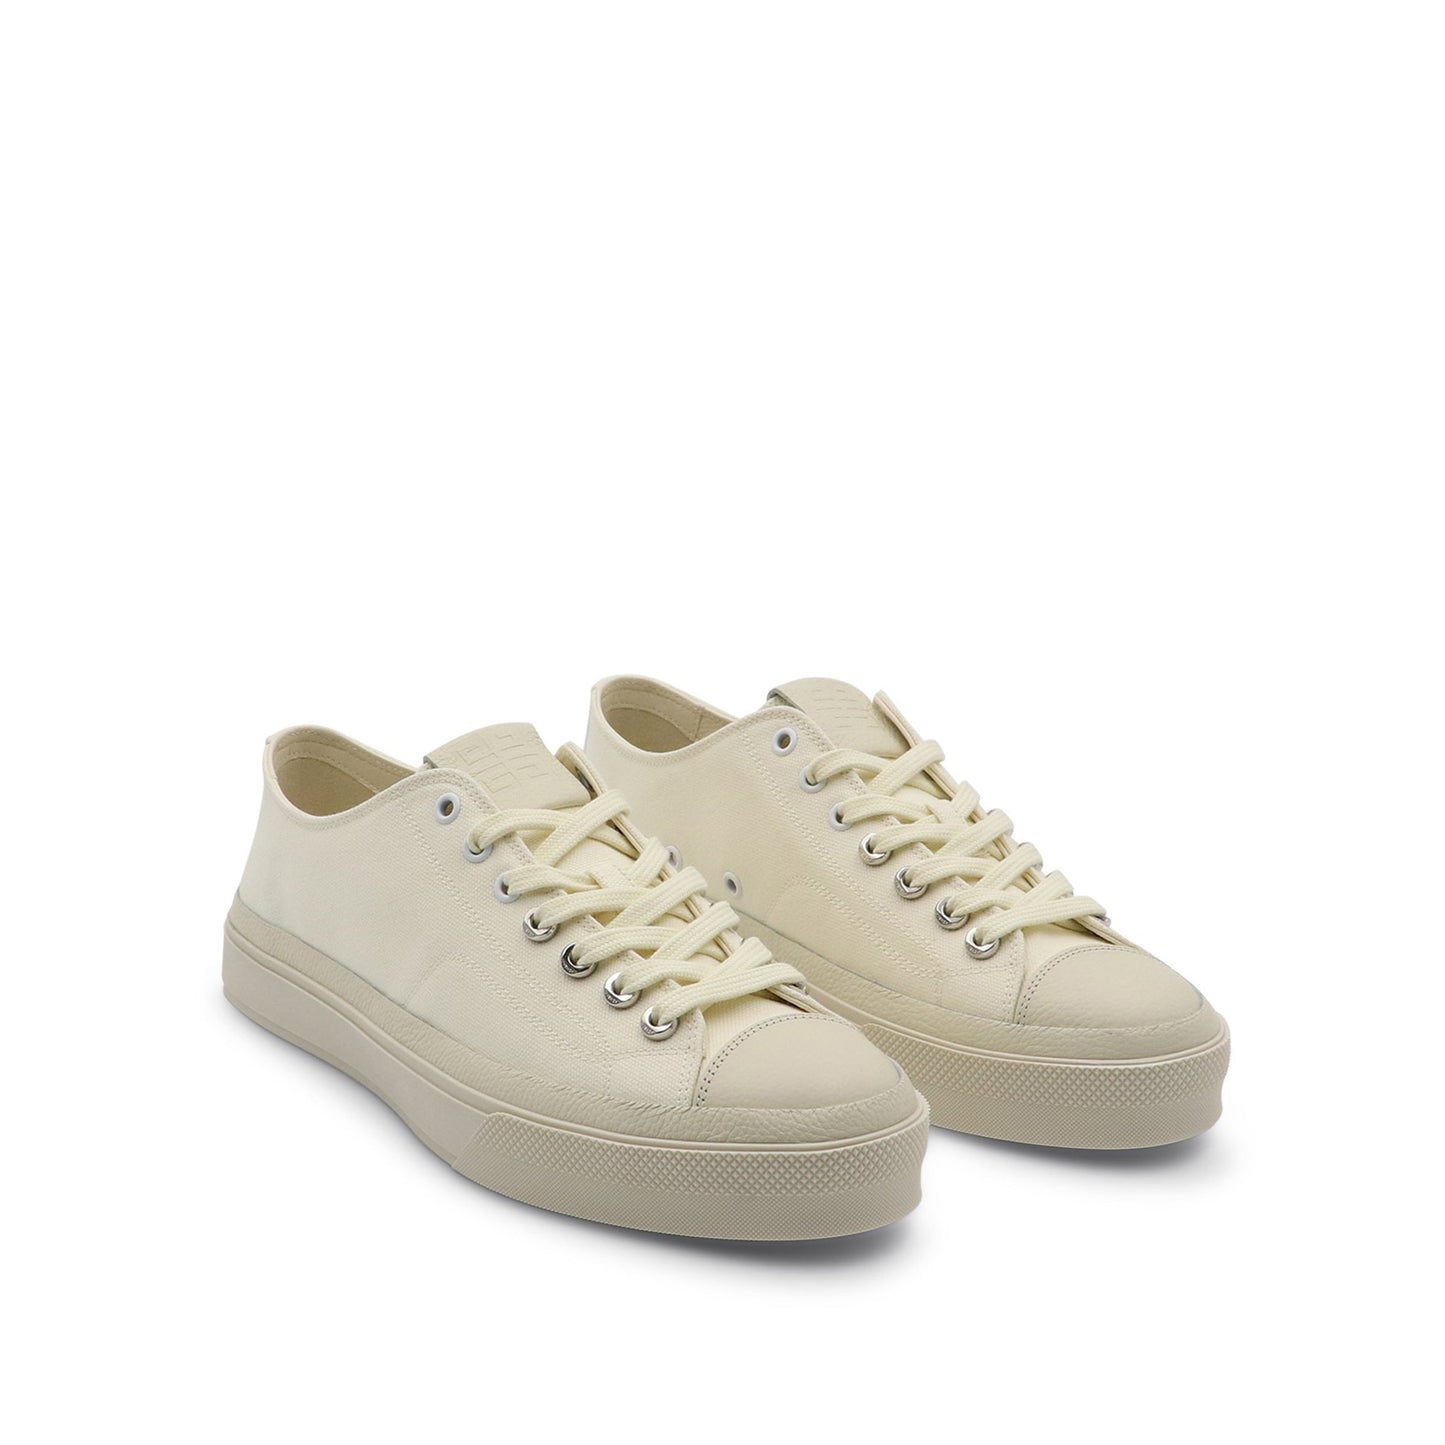 City Low Sneaker in Off White